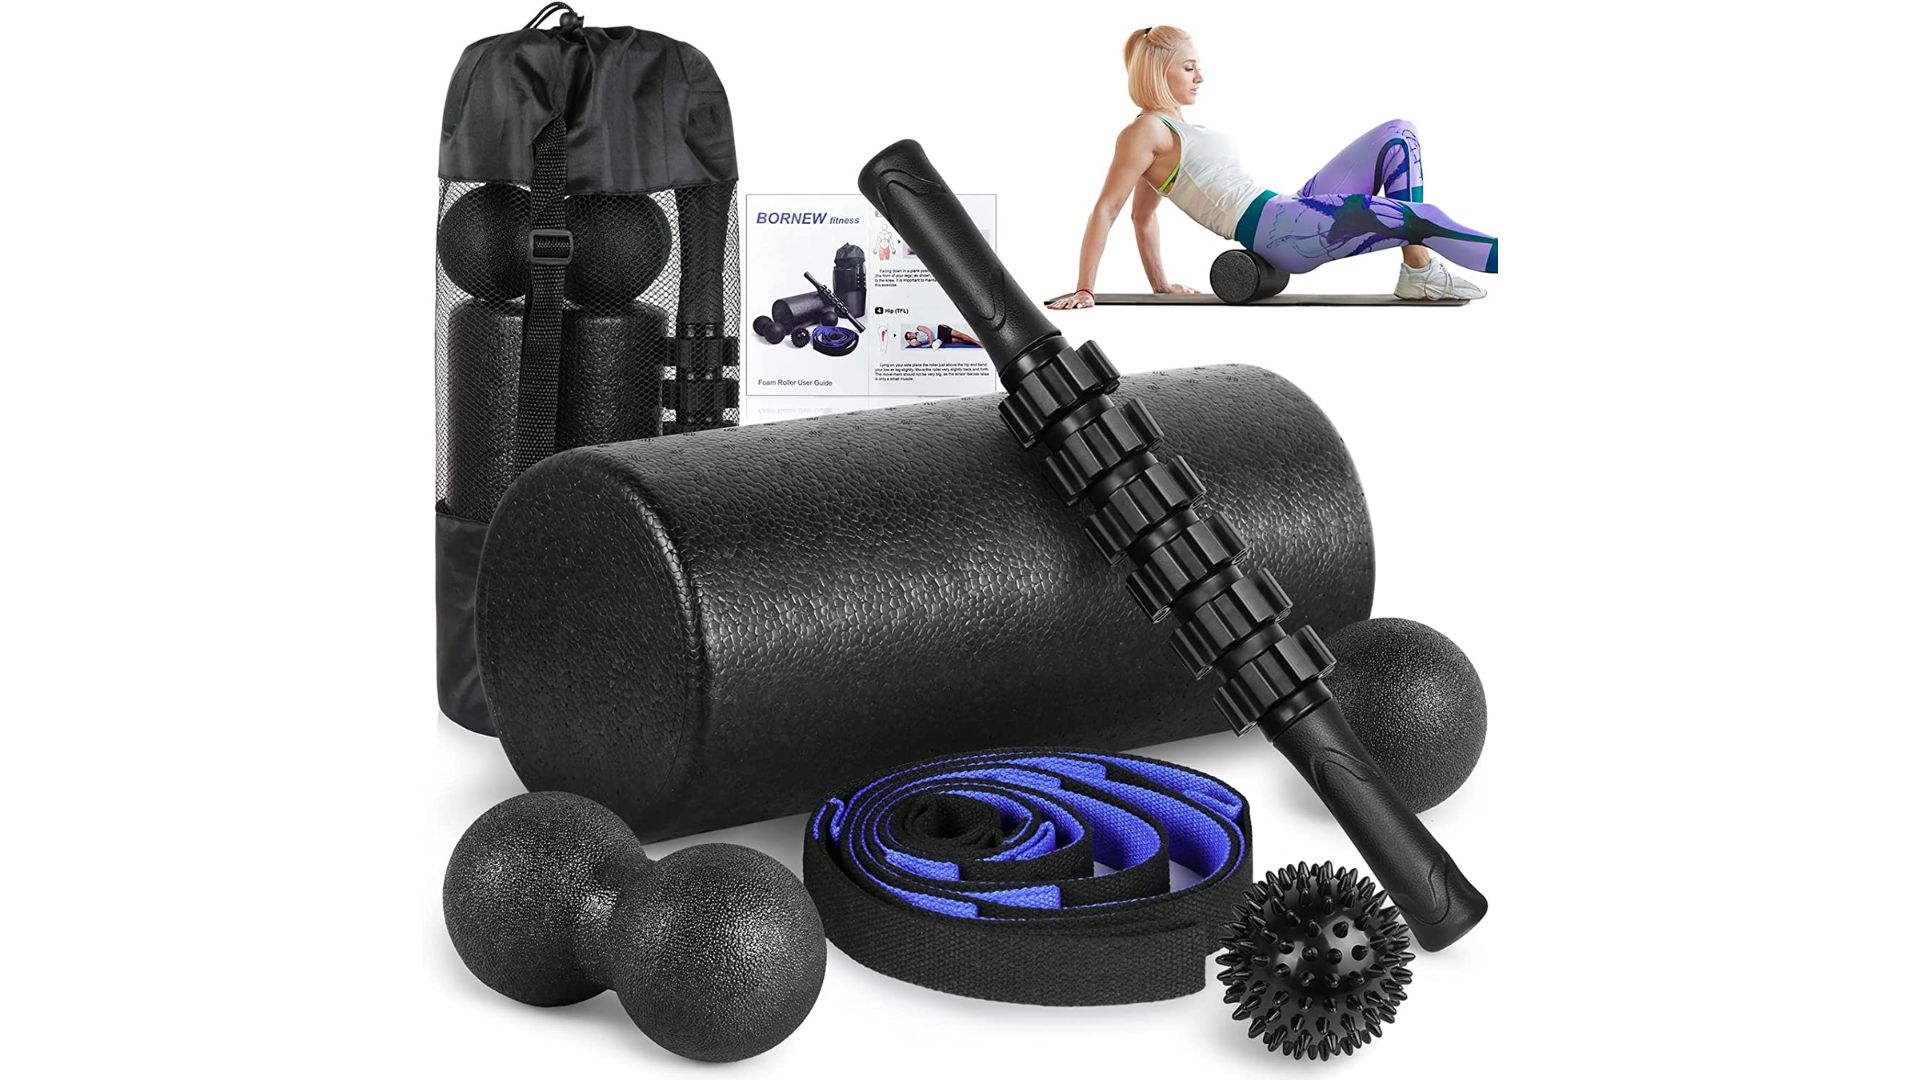 Best Gifts For Gym Lovers